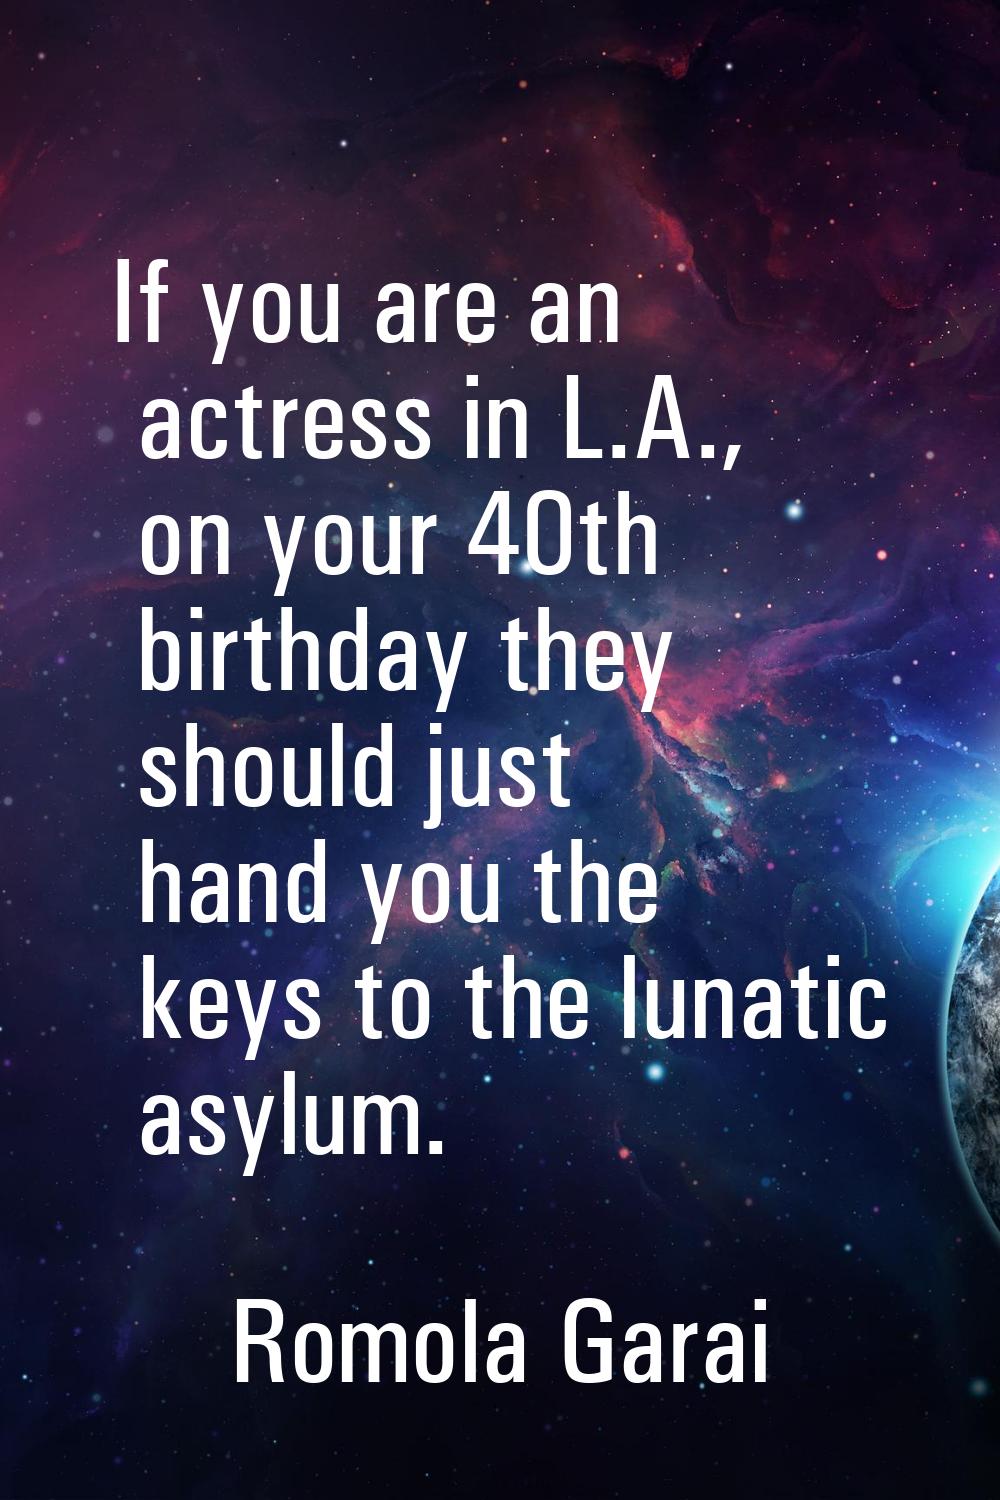 If you are an actress in L.A., on your 40th birthday they should just hand you the keys to the luna